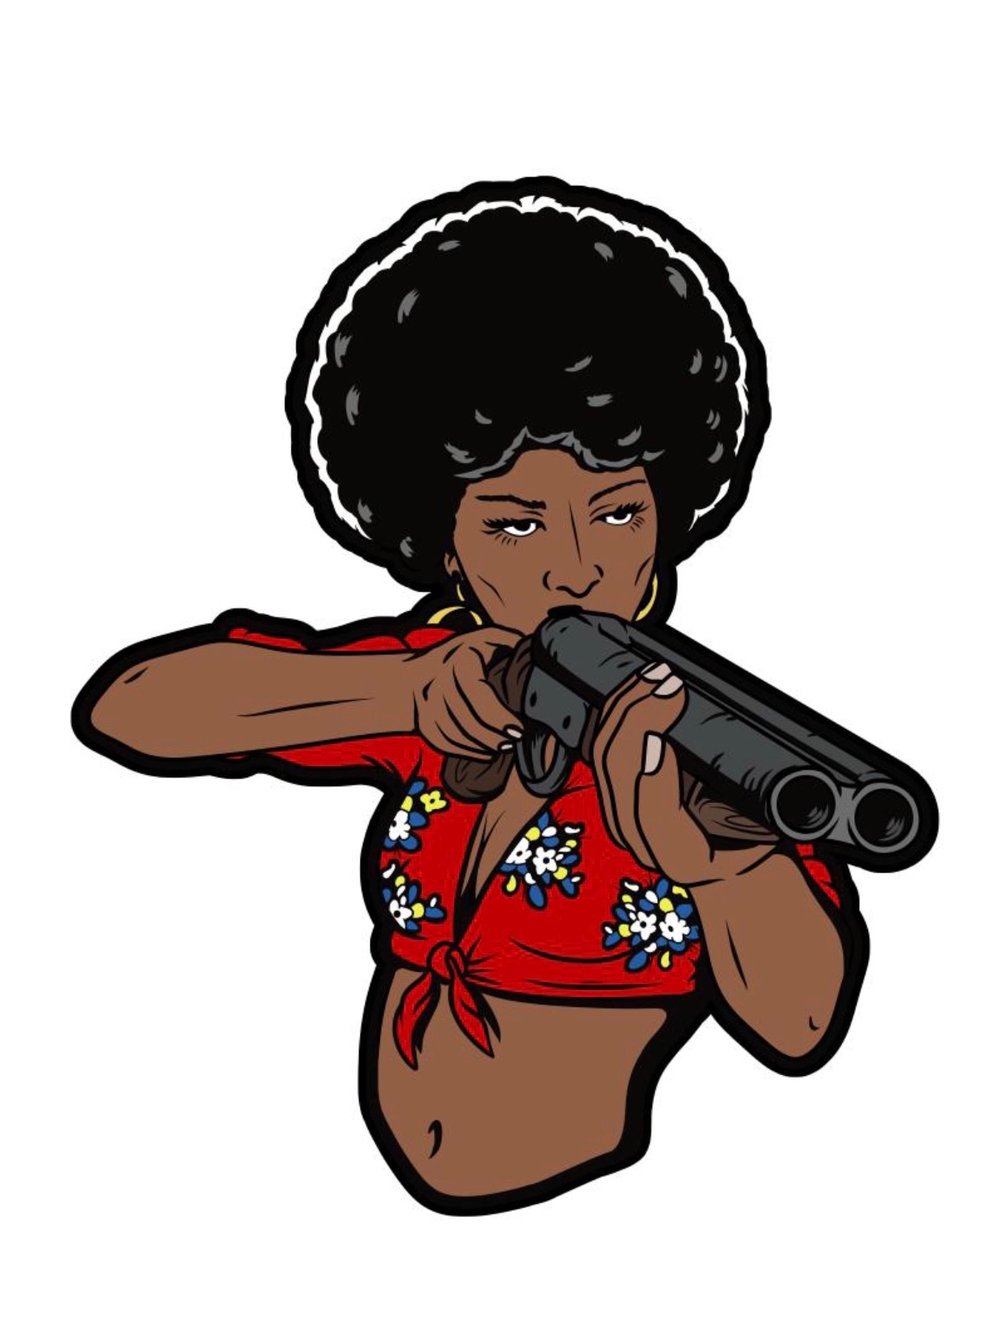 Image of Coffy by Pyscho Street Bum